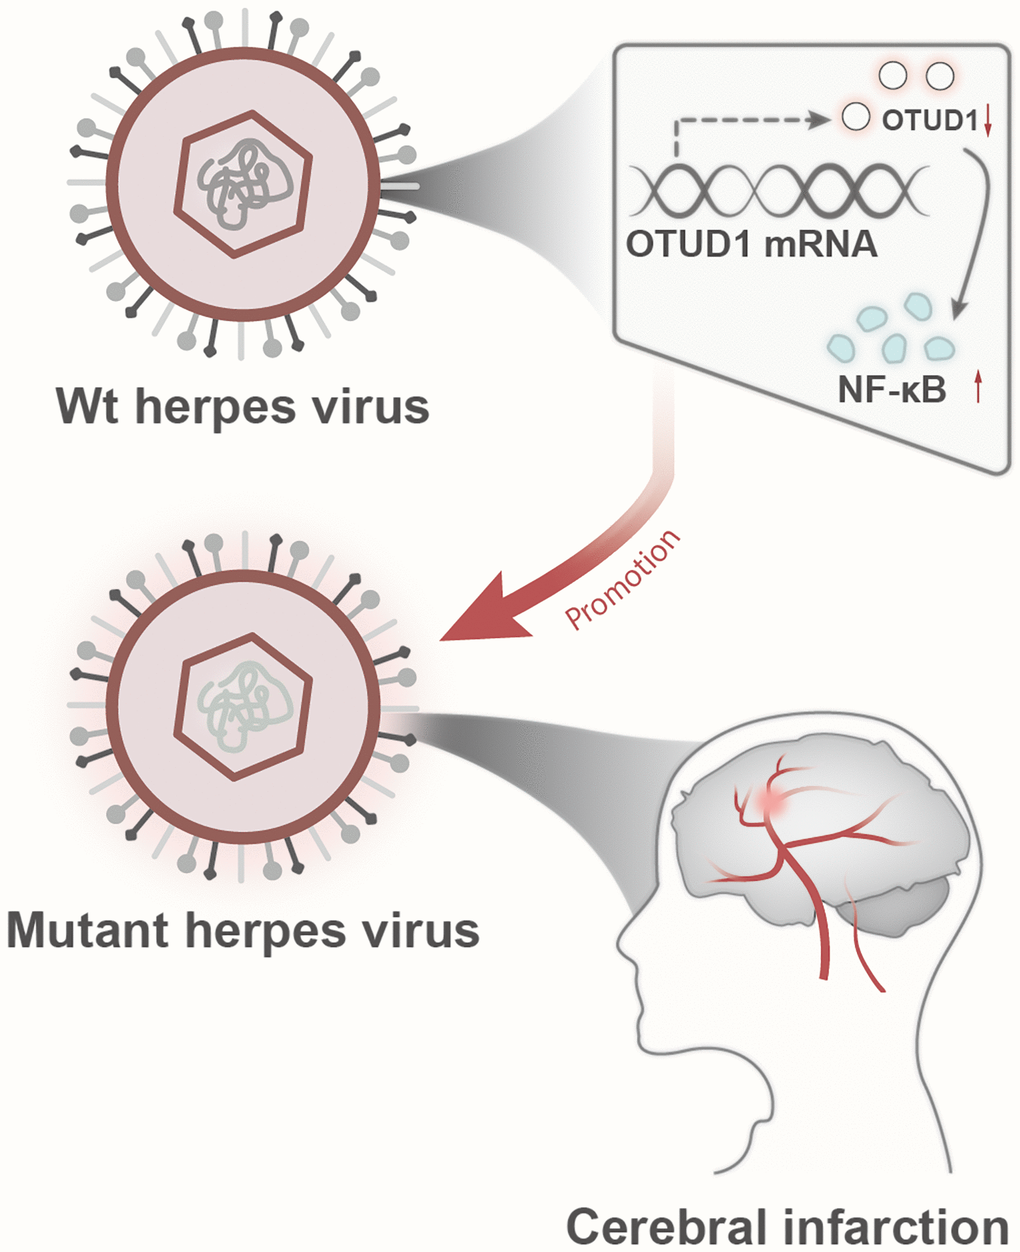 Schematic diagram of the molecular mechanism by which herpesvirus latency activates the OTUD1/NF-κB signaling pathway to promote stroke occurrence.